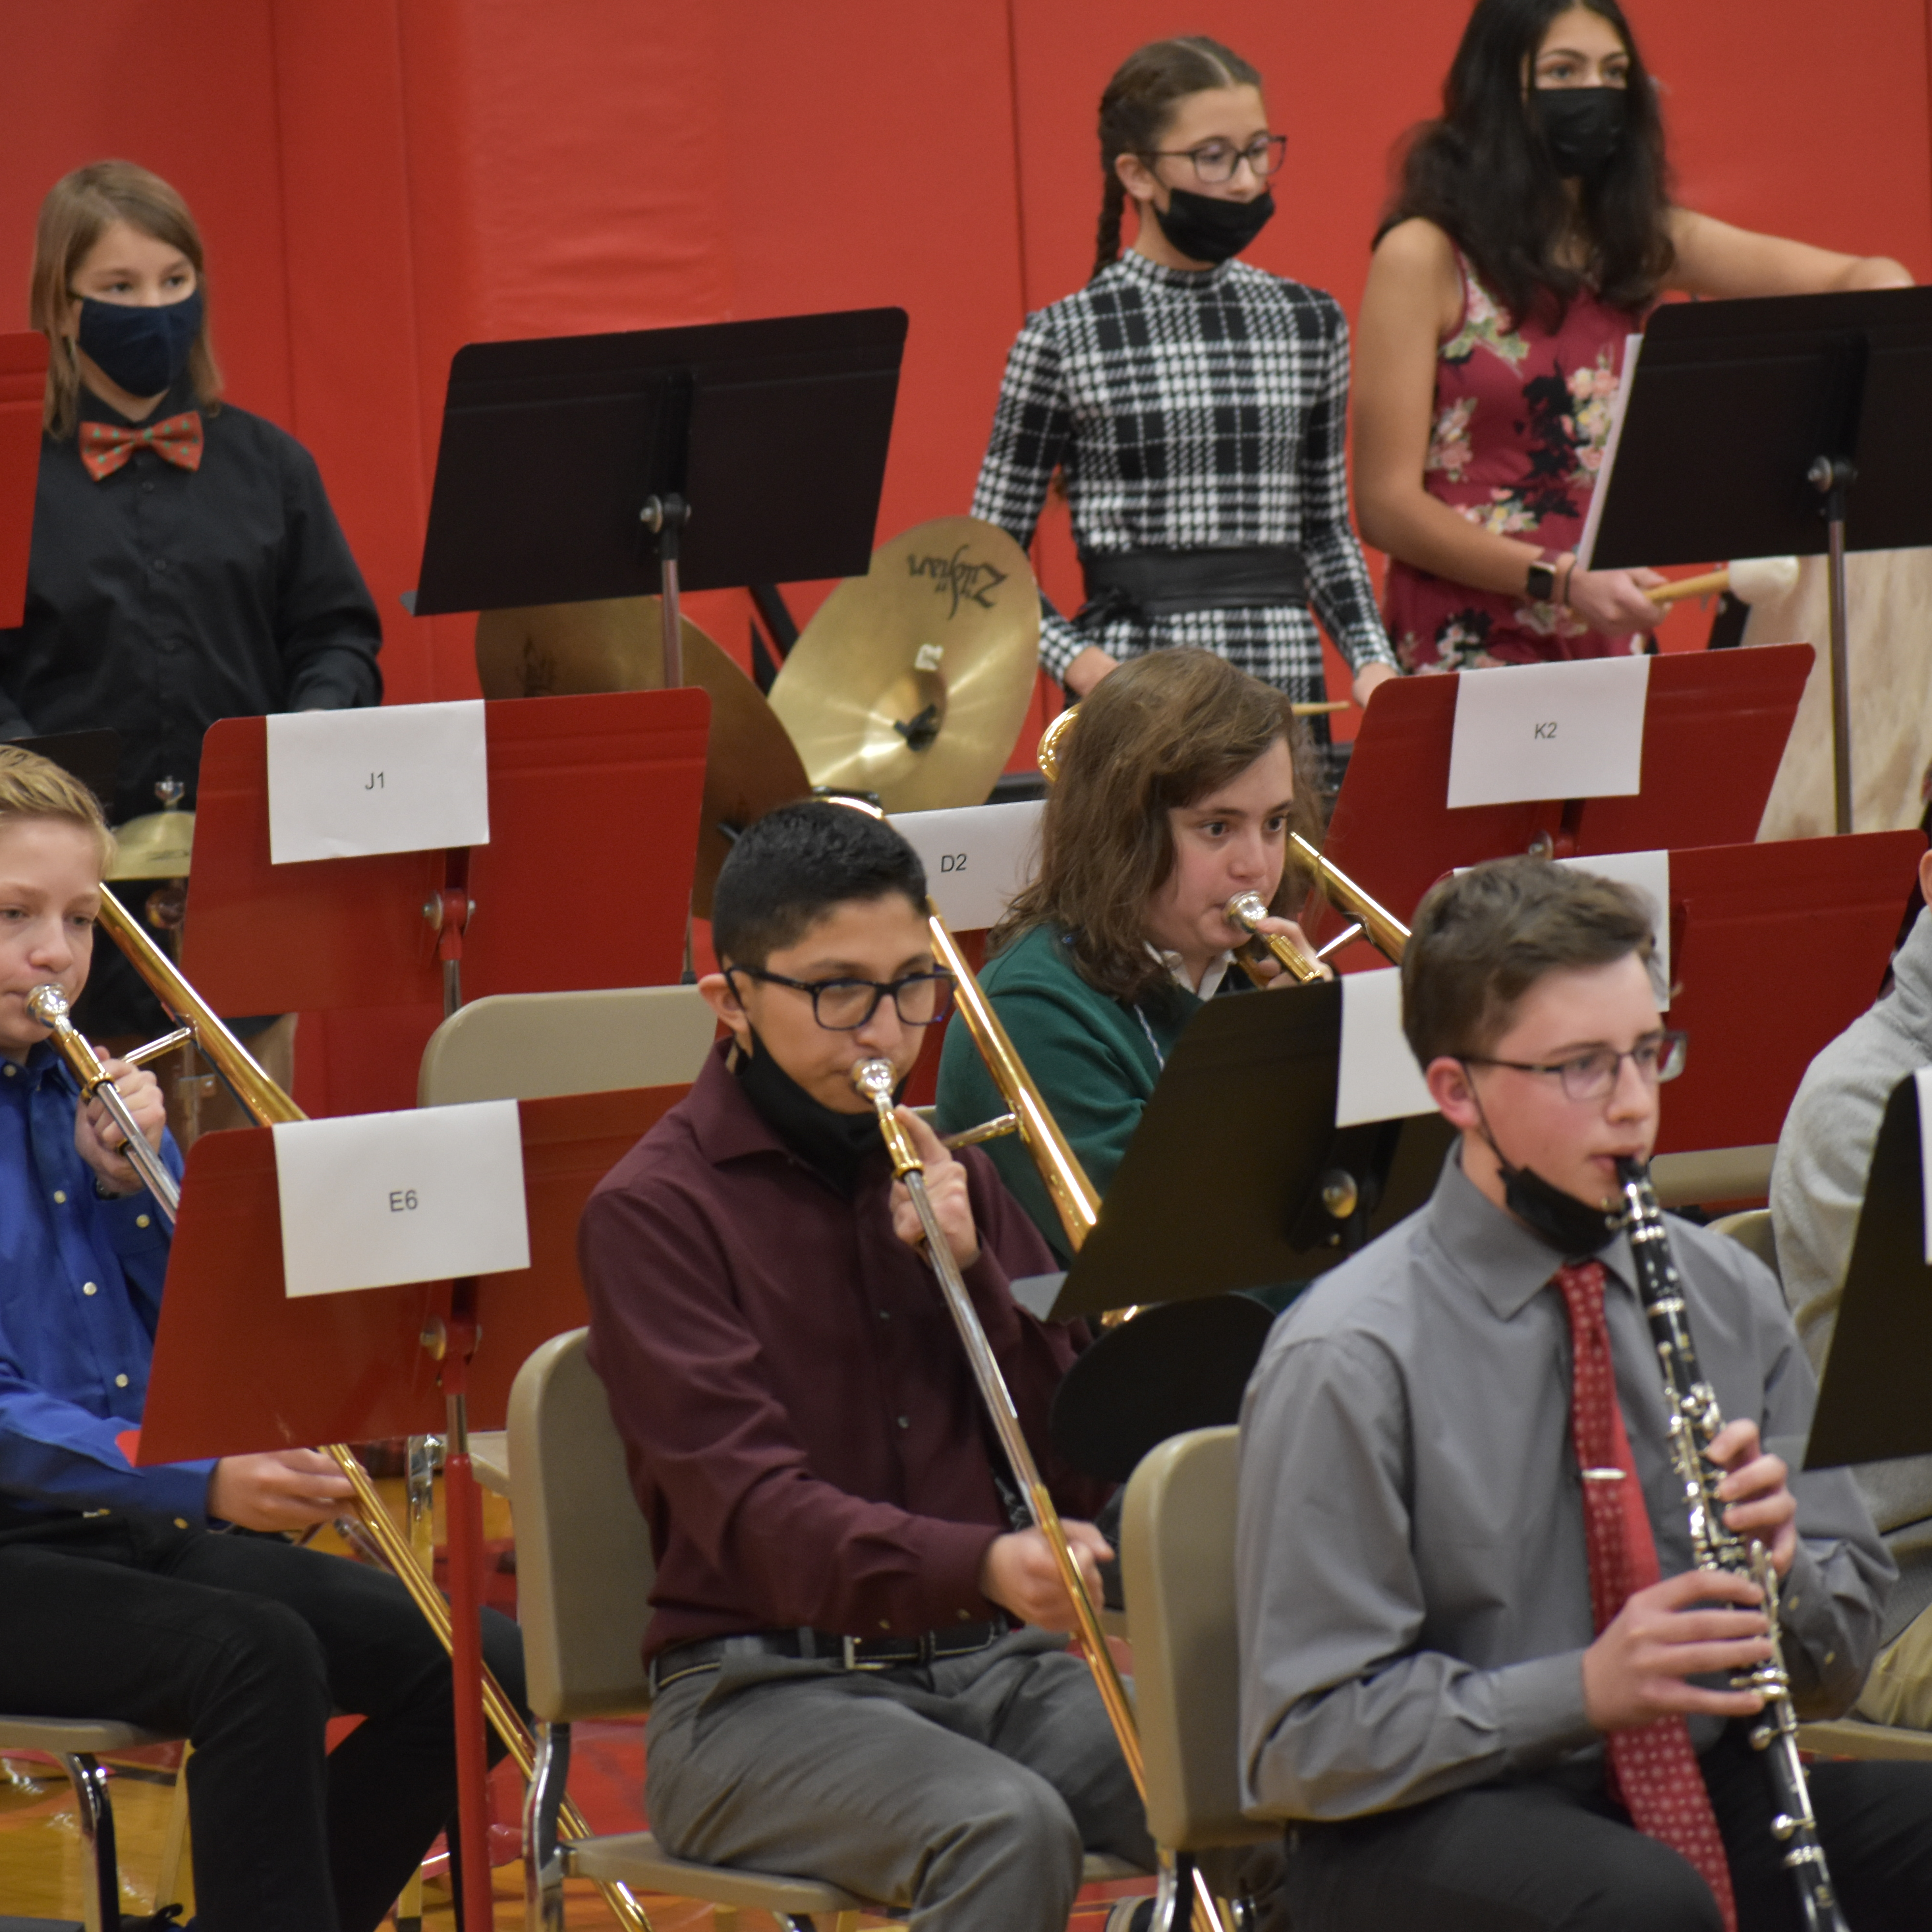 Band members playing during a concert - clarinets and trombones in the foreground